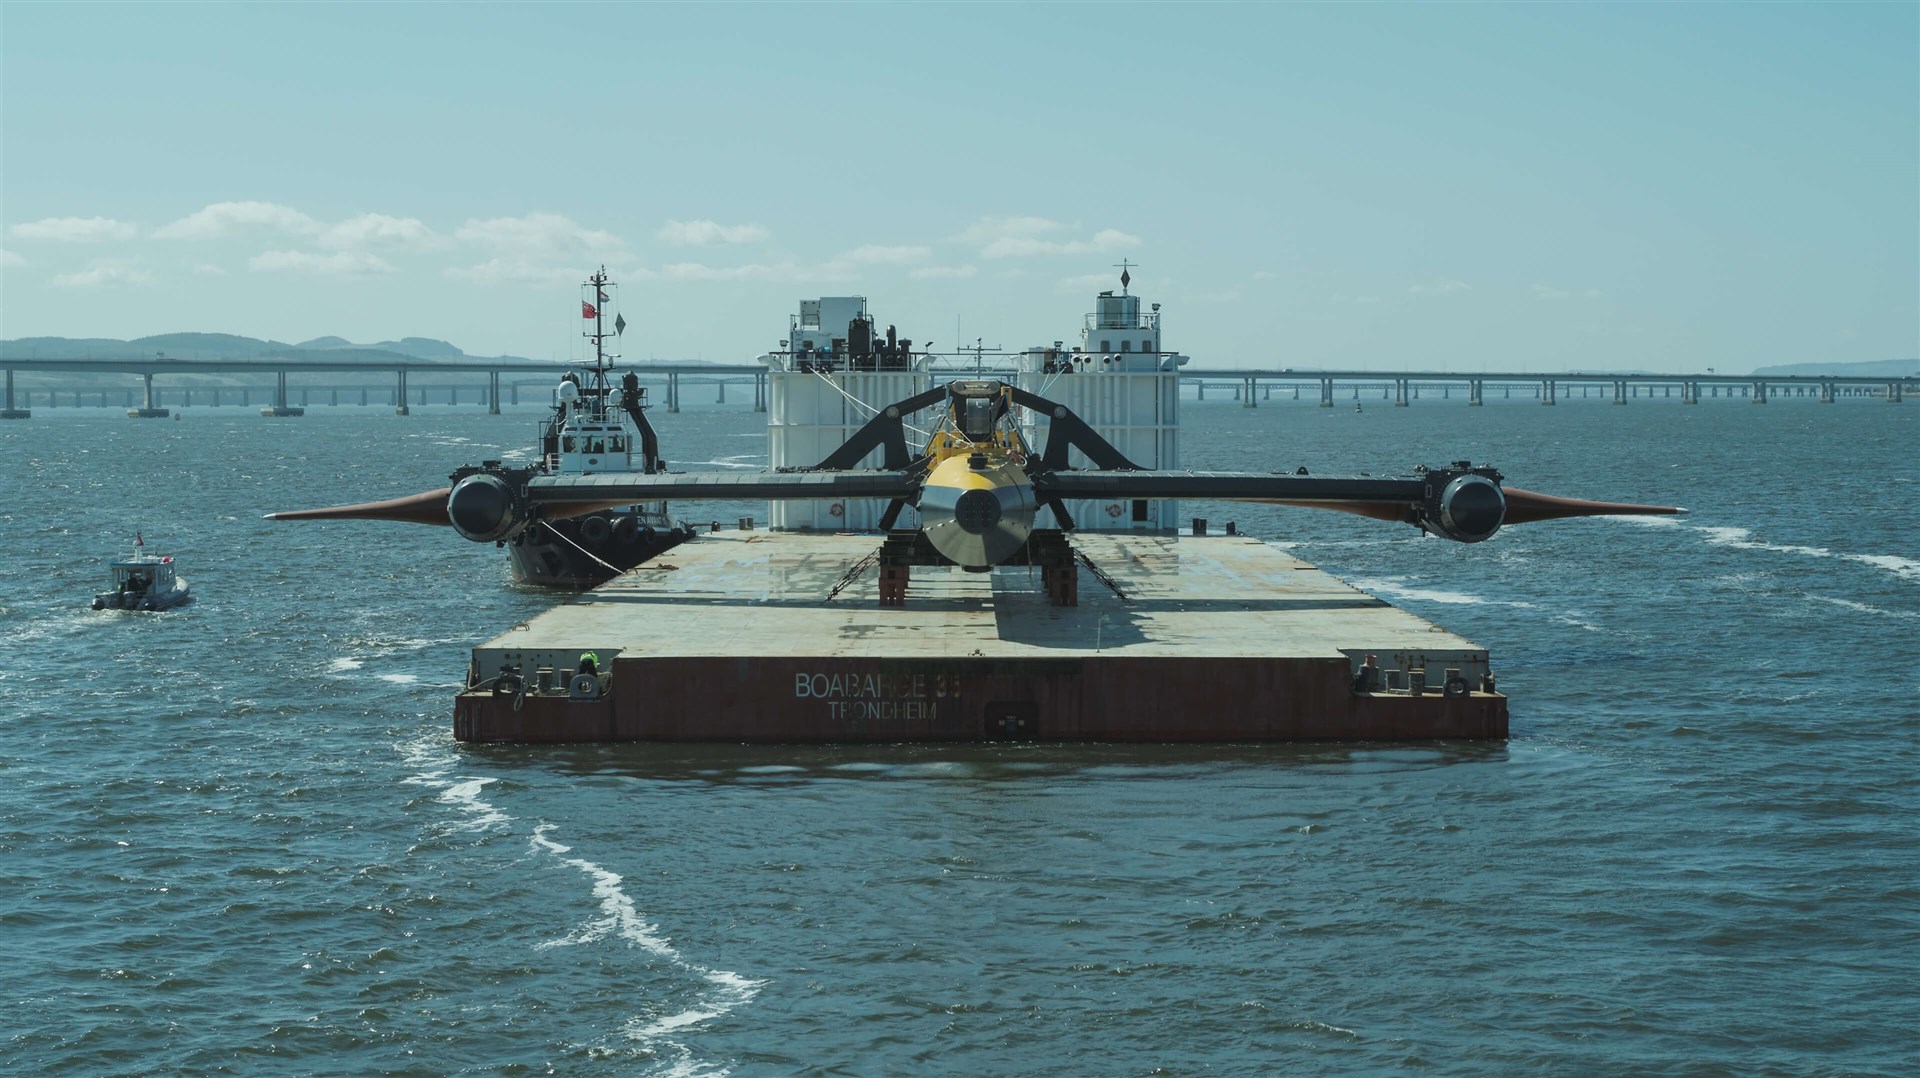 The Orbital O2, the world’s most powerful tidal turbine, has begun exporting clean energy.